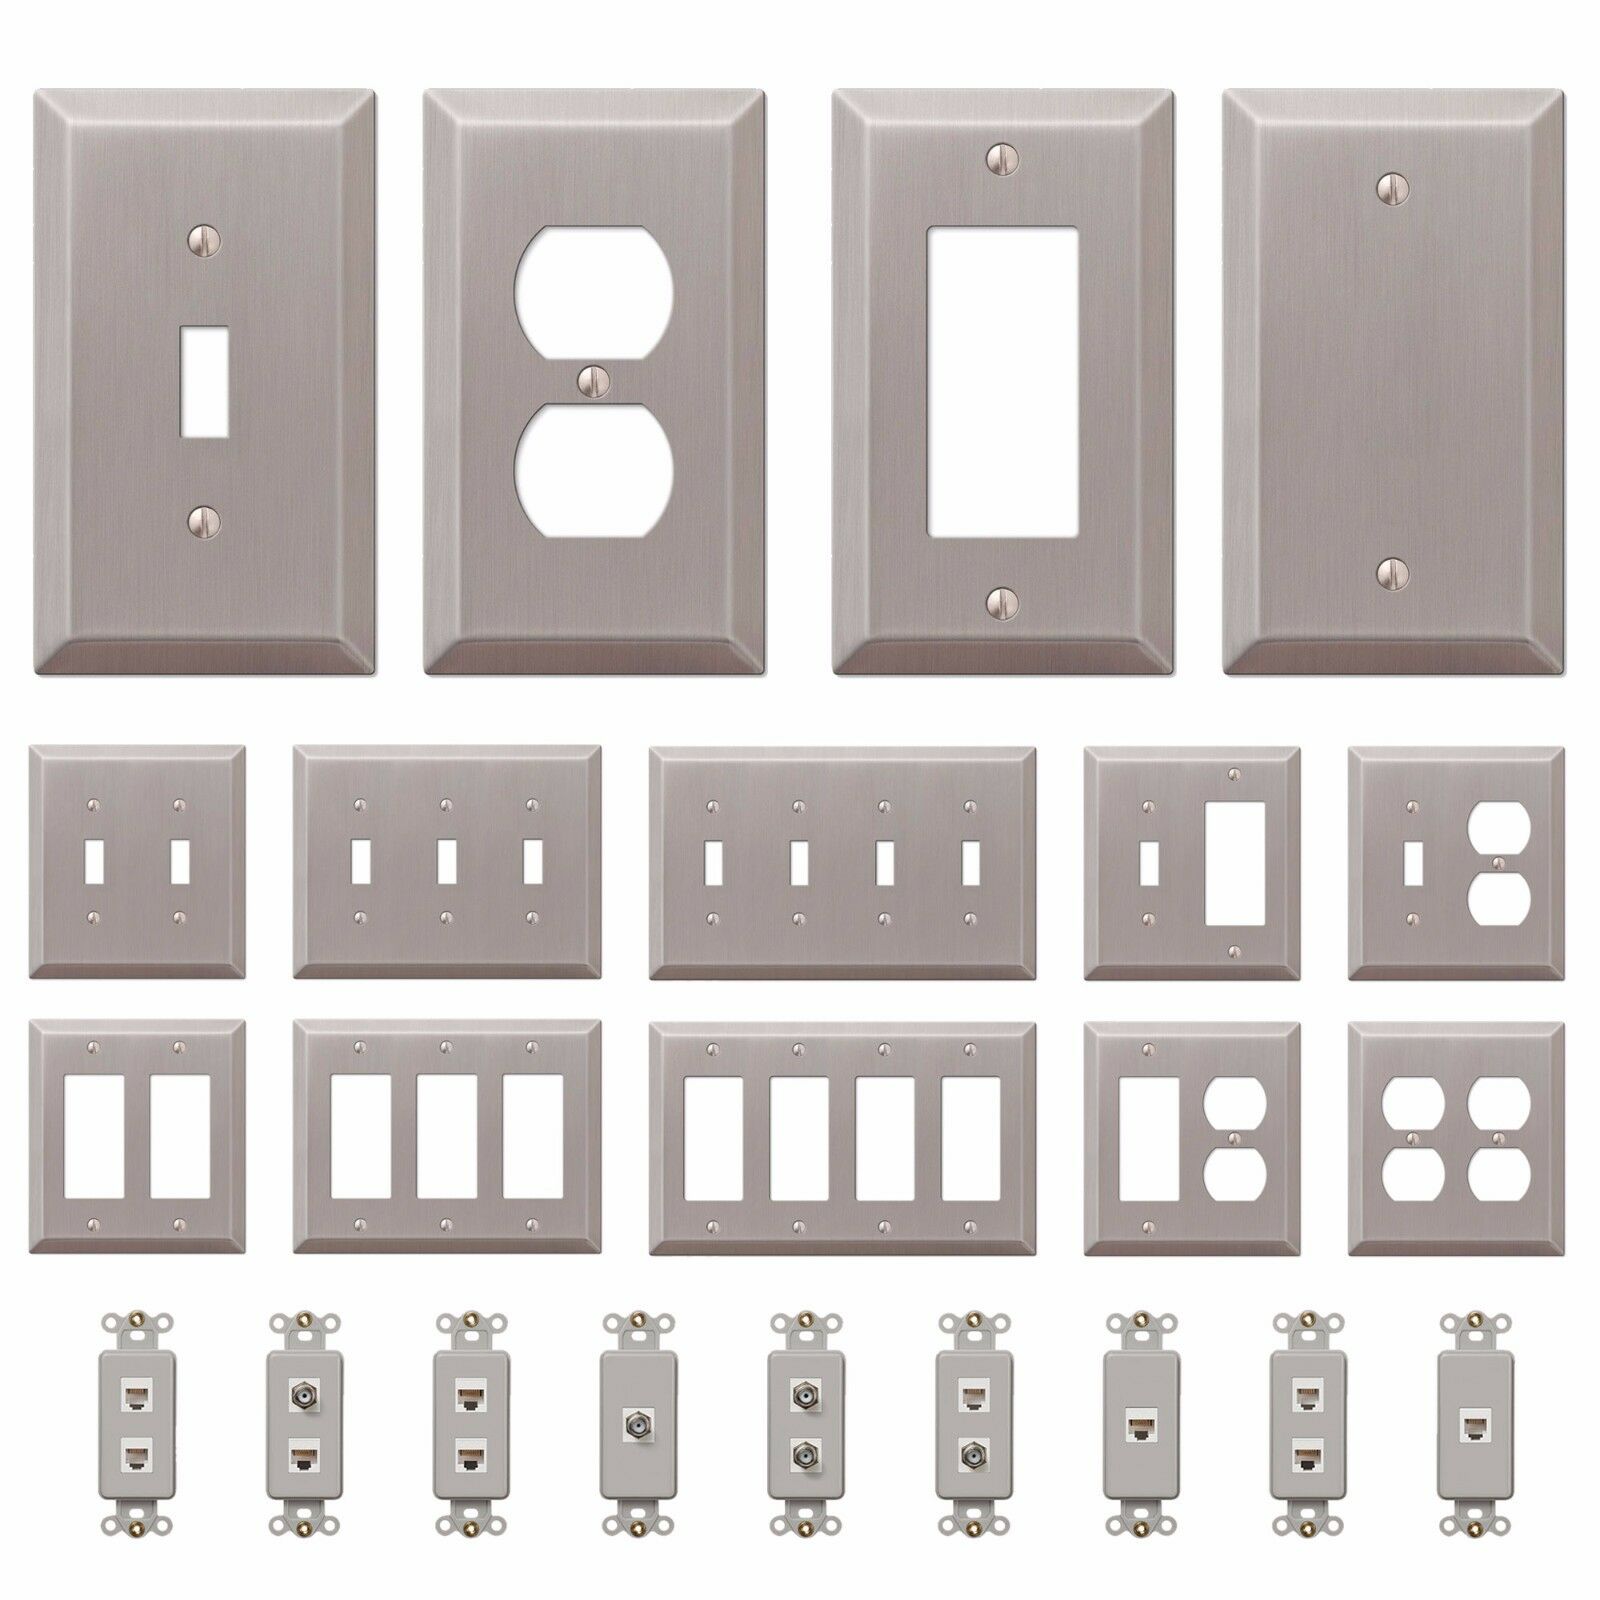 Wall Switch Plate Outlet Cover Toggle Duplex Rocker - Brushed / Satin Nickel